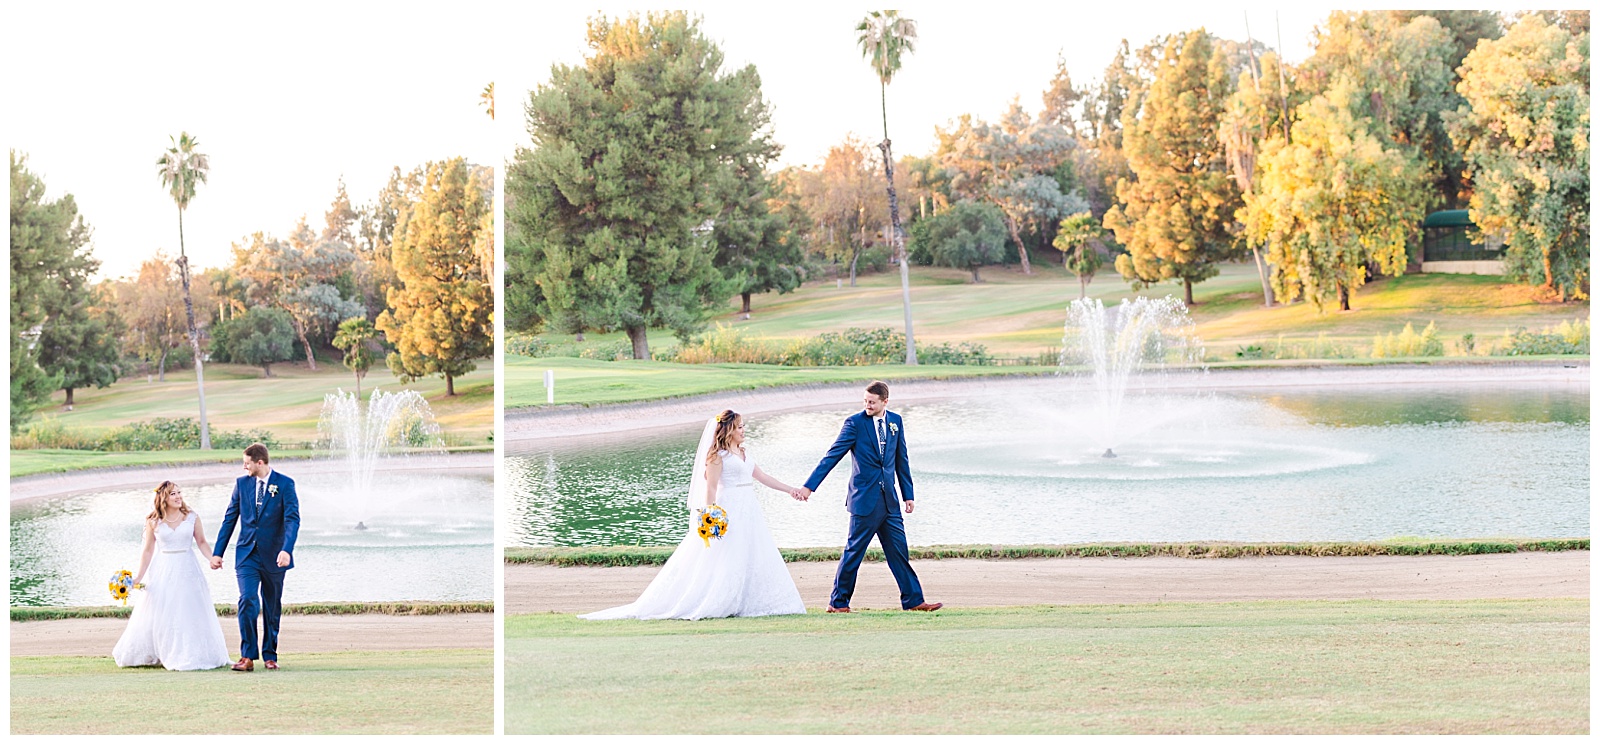 Riverside Wedding the Canyon Crest Country Club. Photographed by Mollie Jane Photography, to see more go to www.molliejanephotography.com